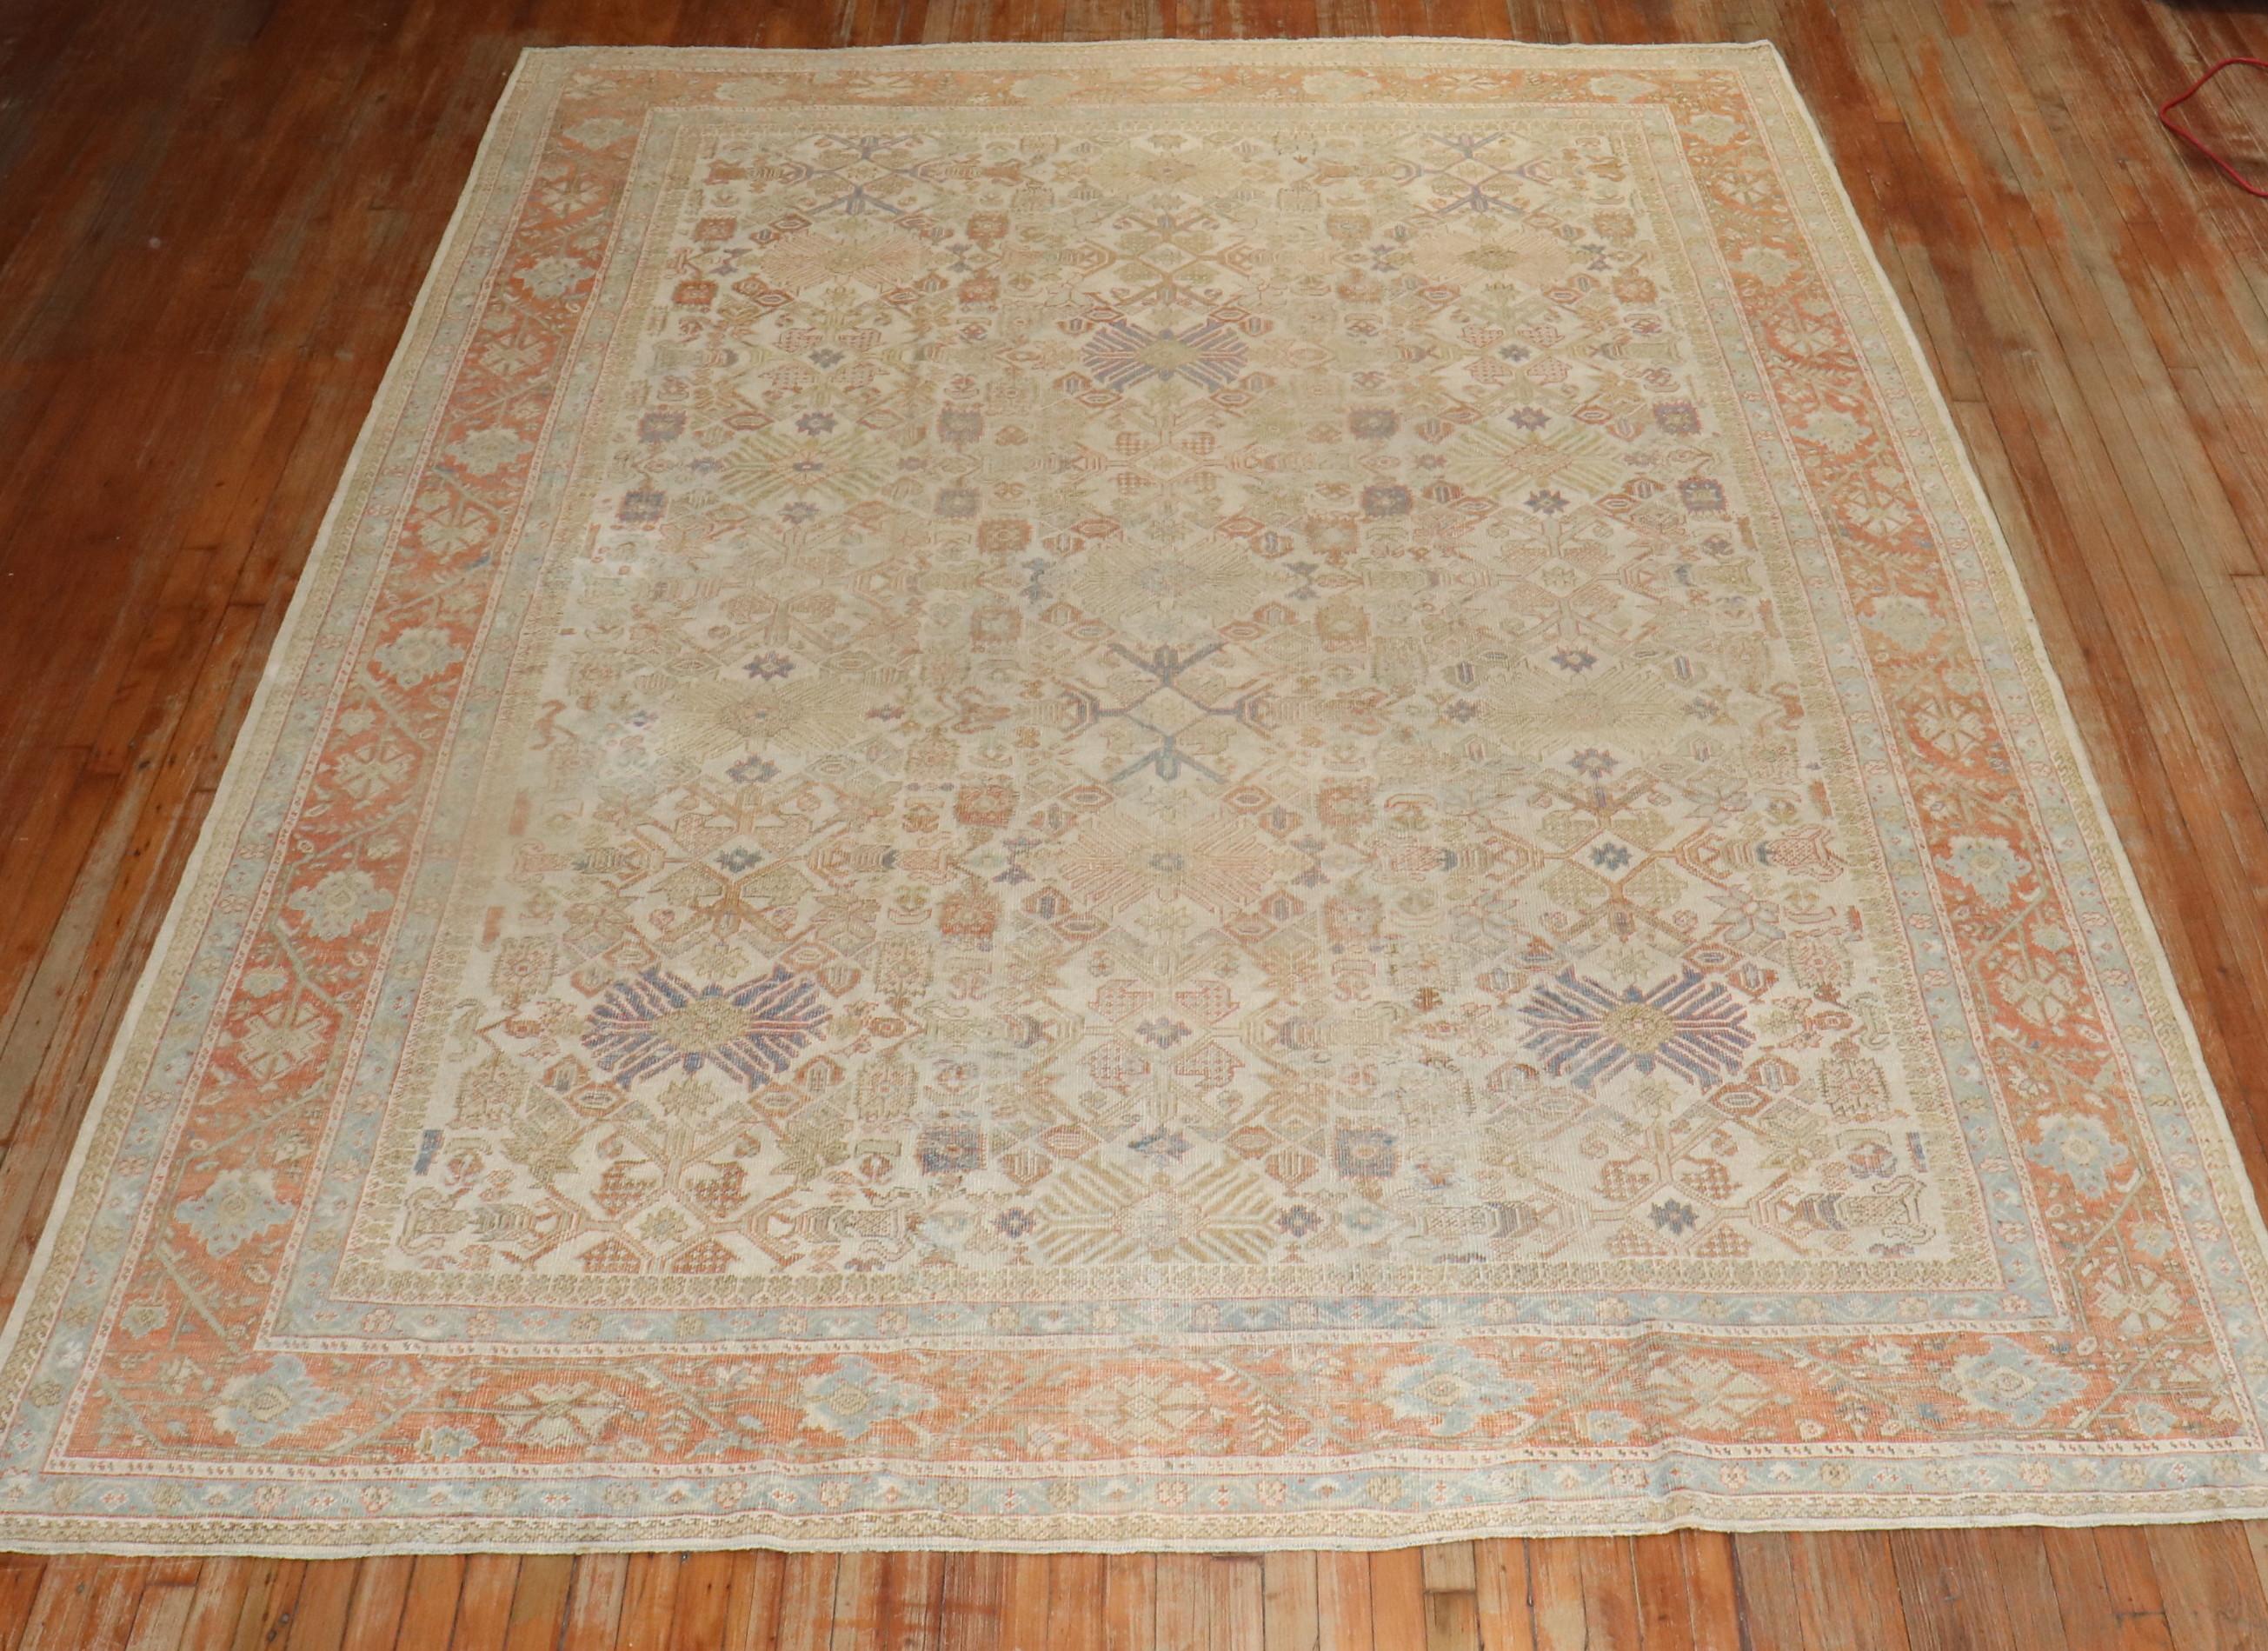 Room size early 20th century antique Persian Mahal rug in light colors

Measures: 8'10” x 11'9